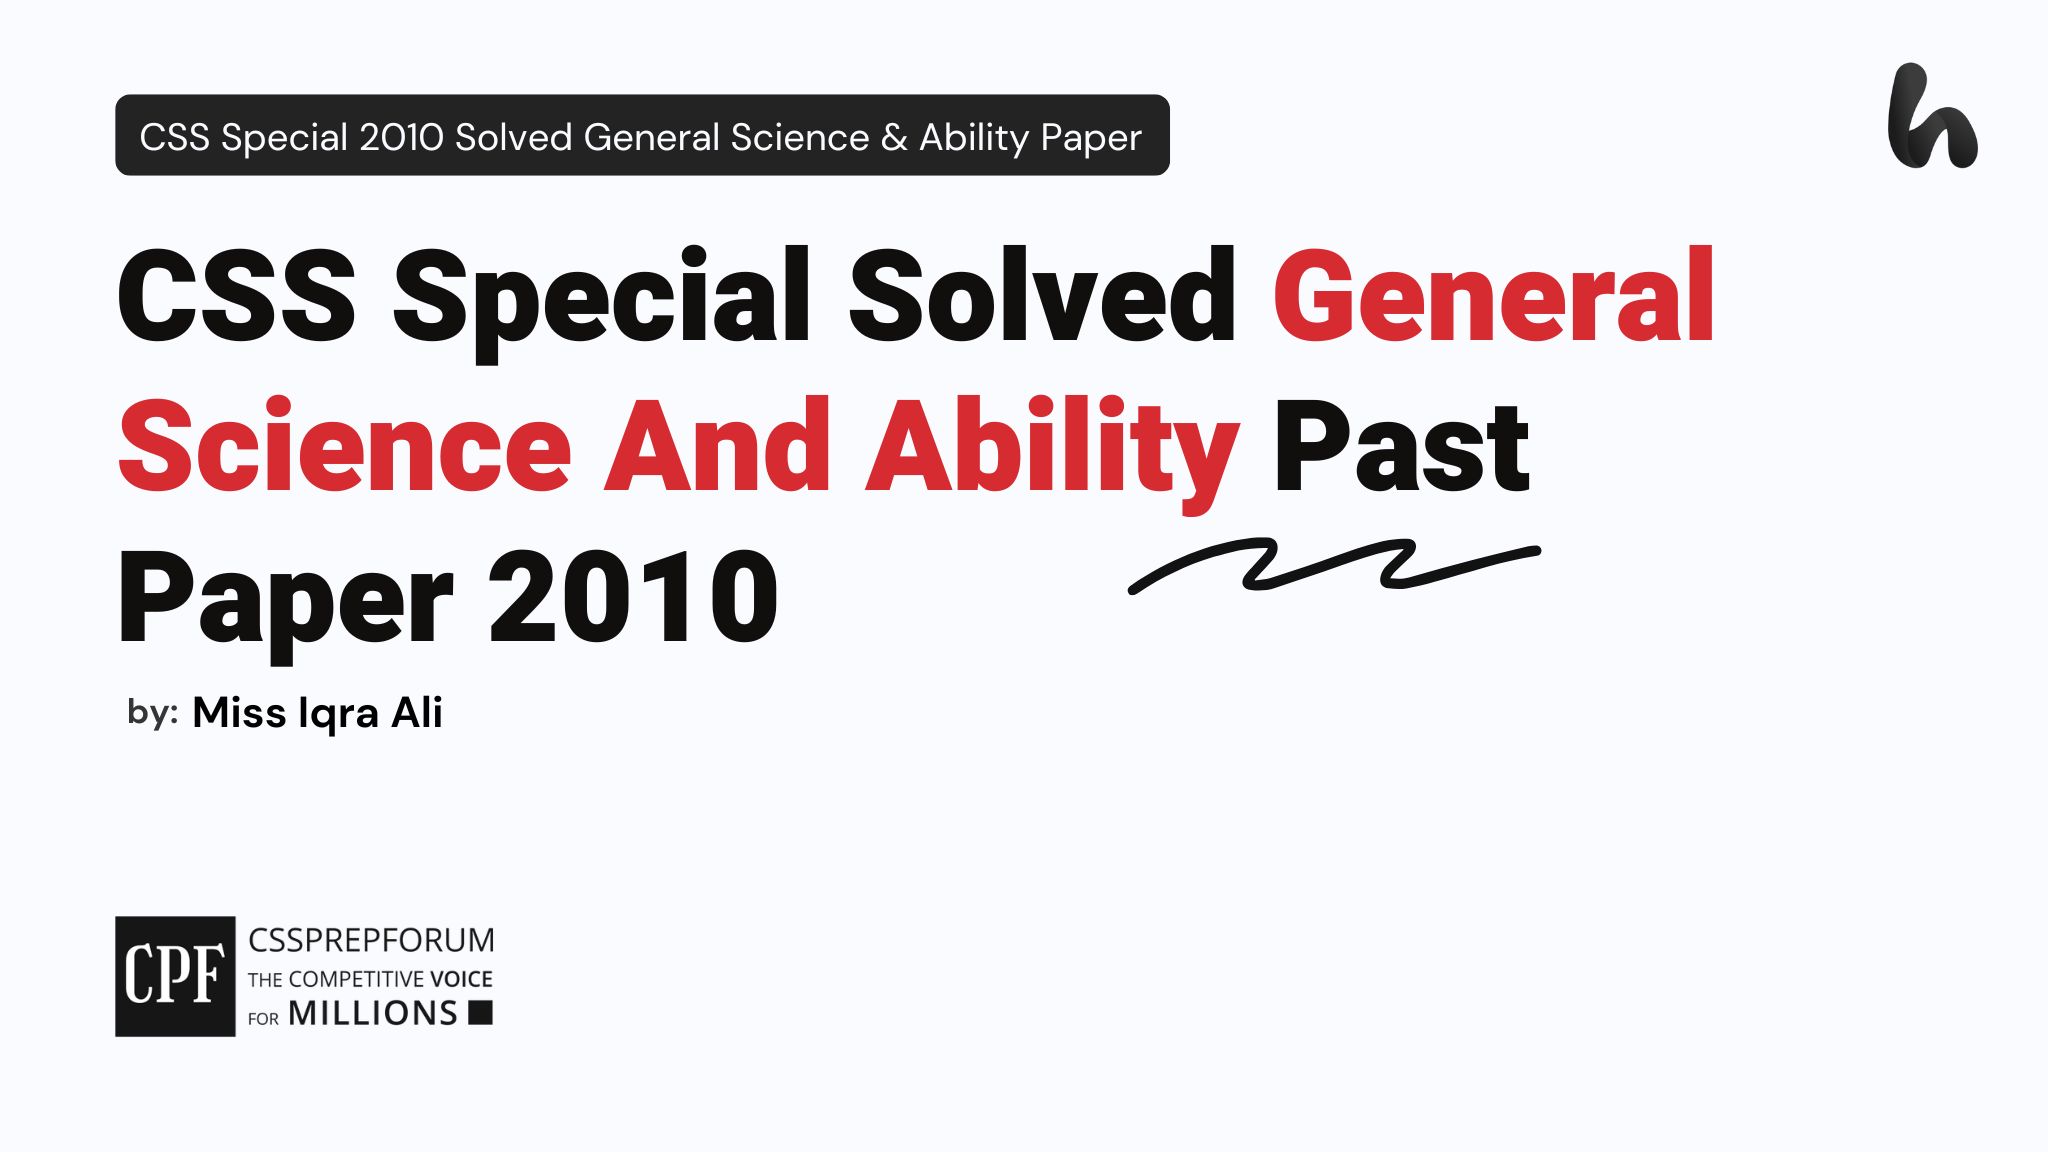 CSS Solved General Science And Ability Past Paper 2010